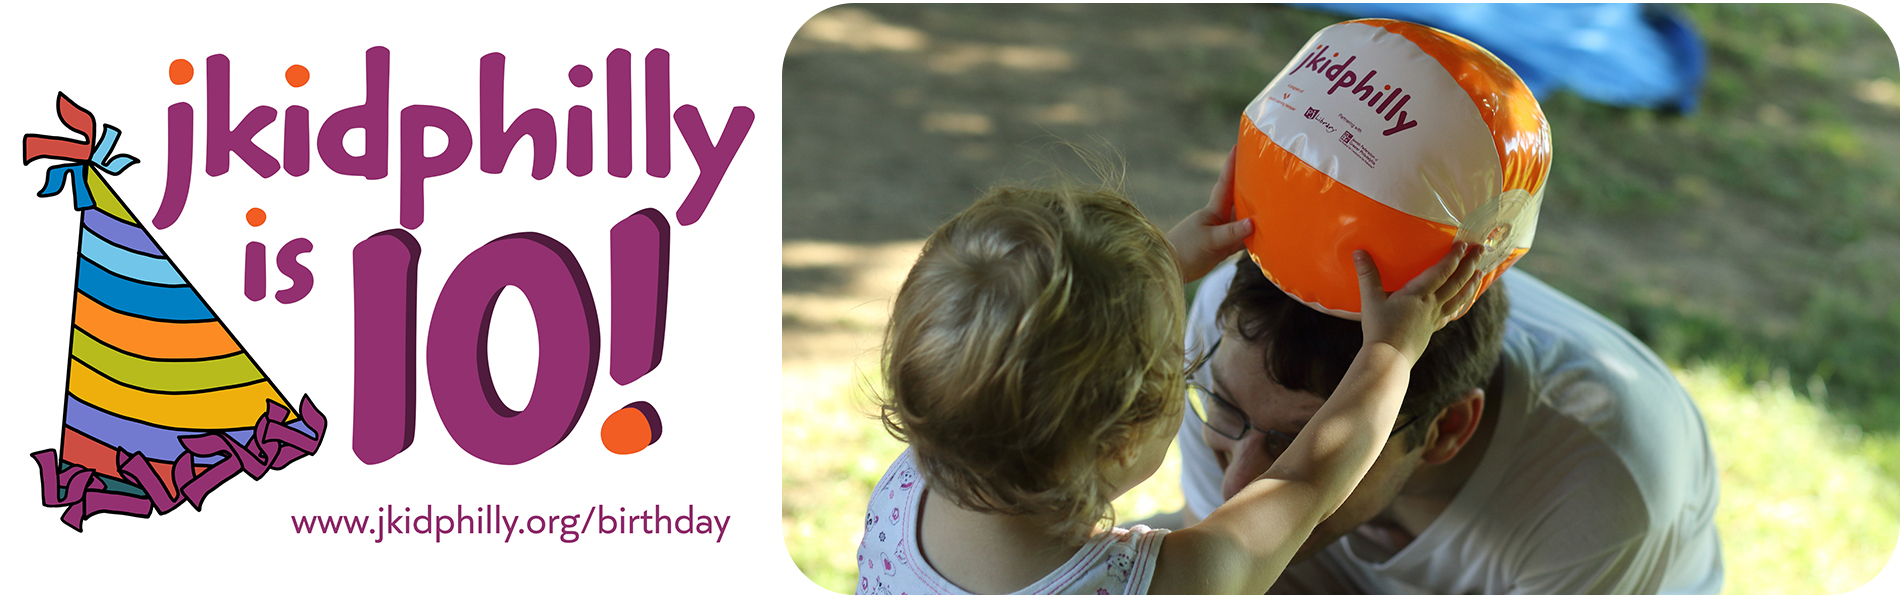 A colorful birthday hat with the words “jkid philly is 10!” written next to it. There is a young child playing with a man in glasses, as he bends down to be eye level with the girl, she playfully puts an orange and white ball on his head.